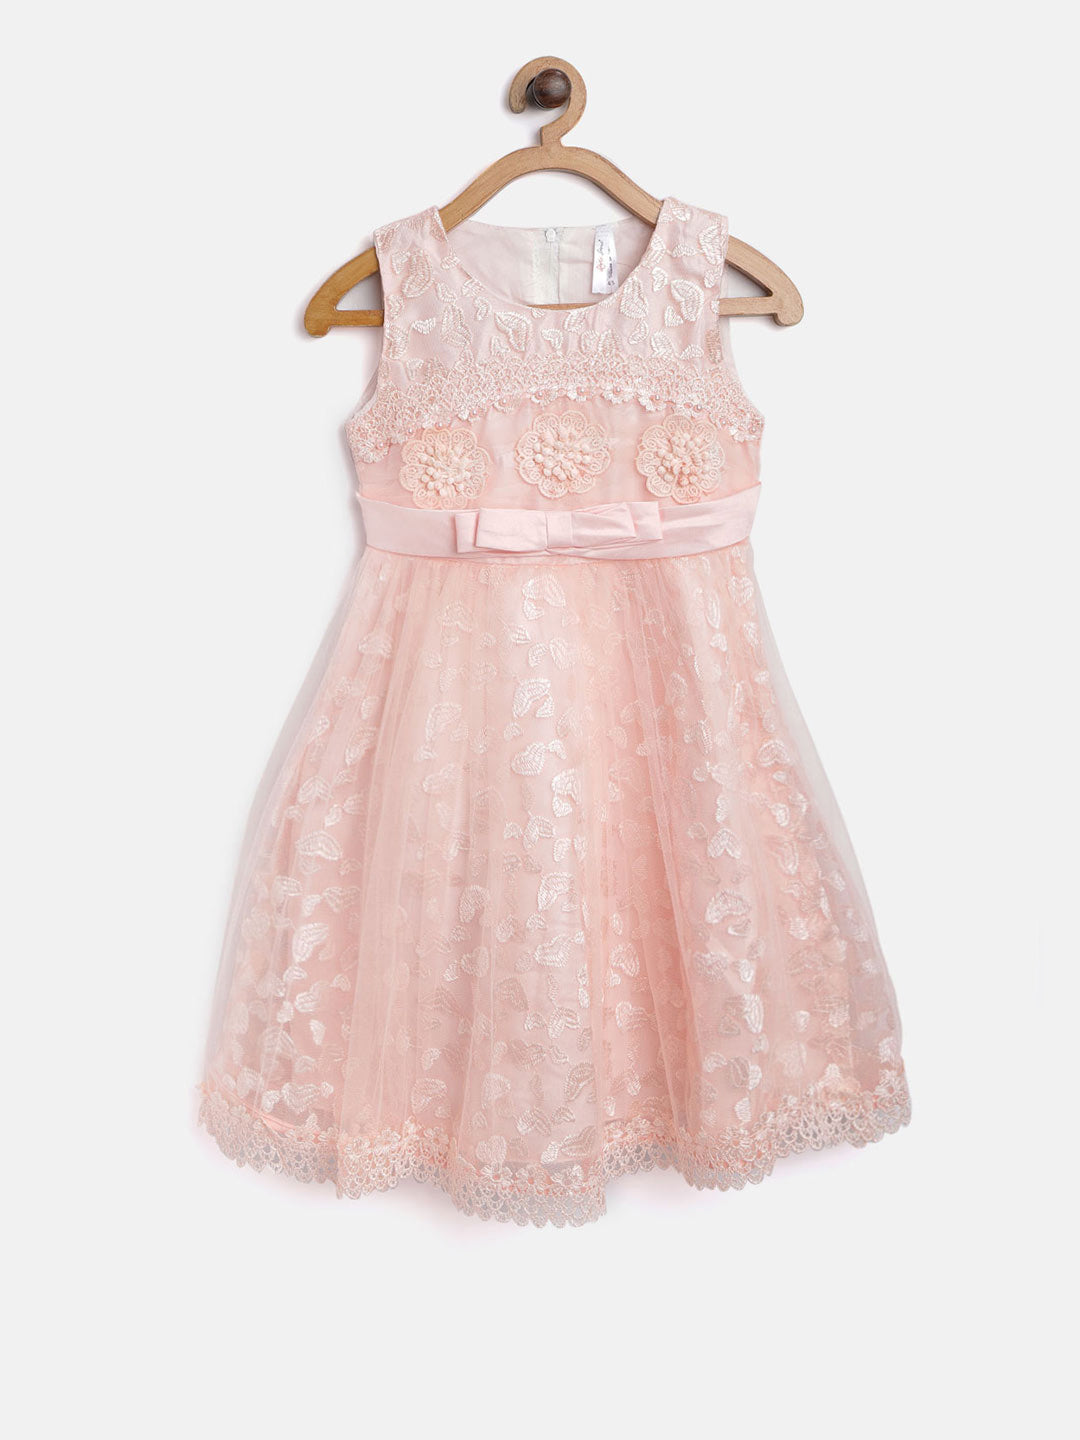 Gilr's Cream Embroidered And Embellished Party Dress - StyleStone Kid